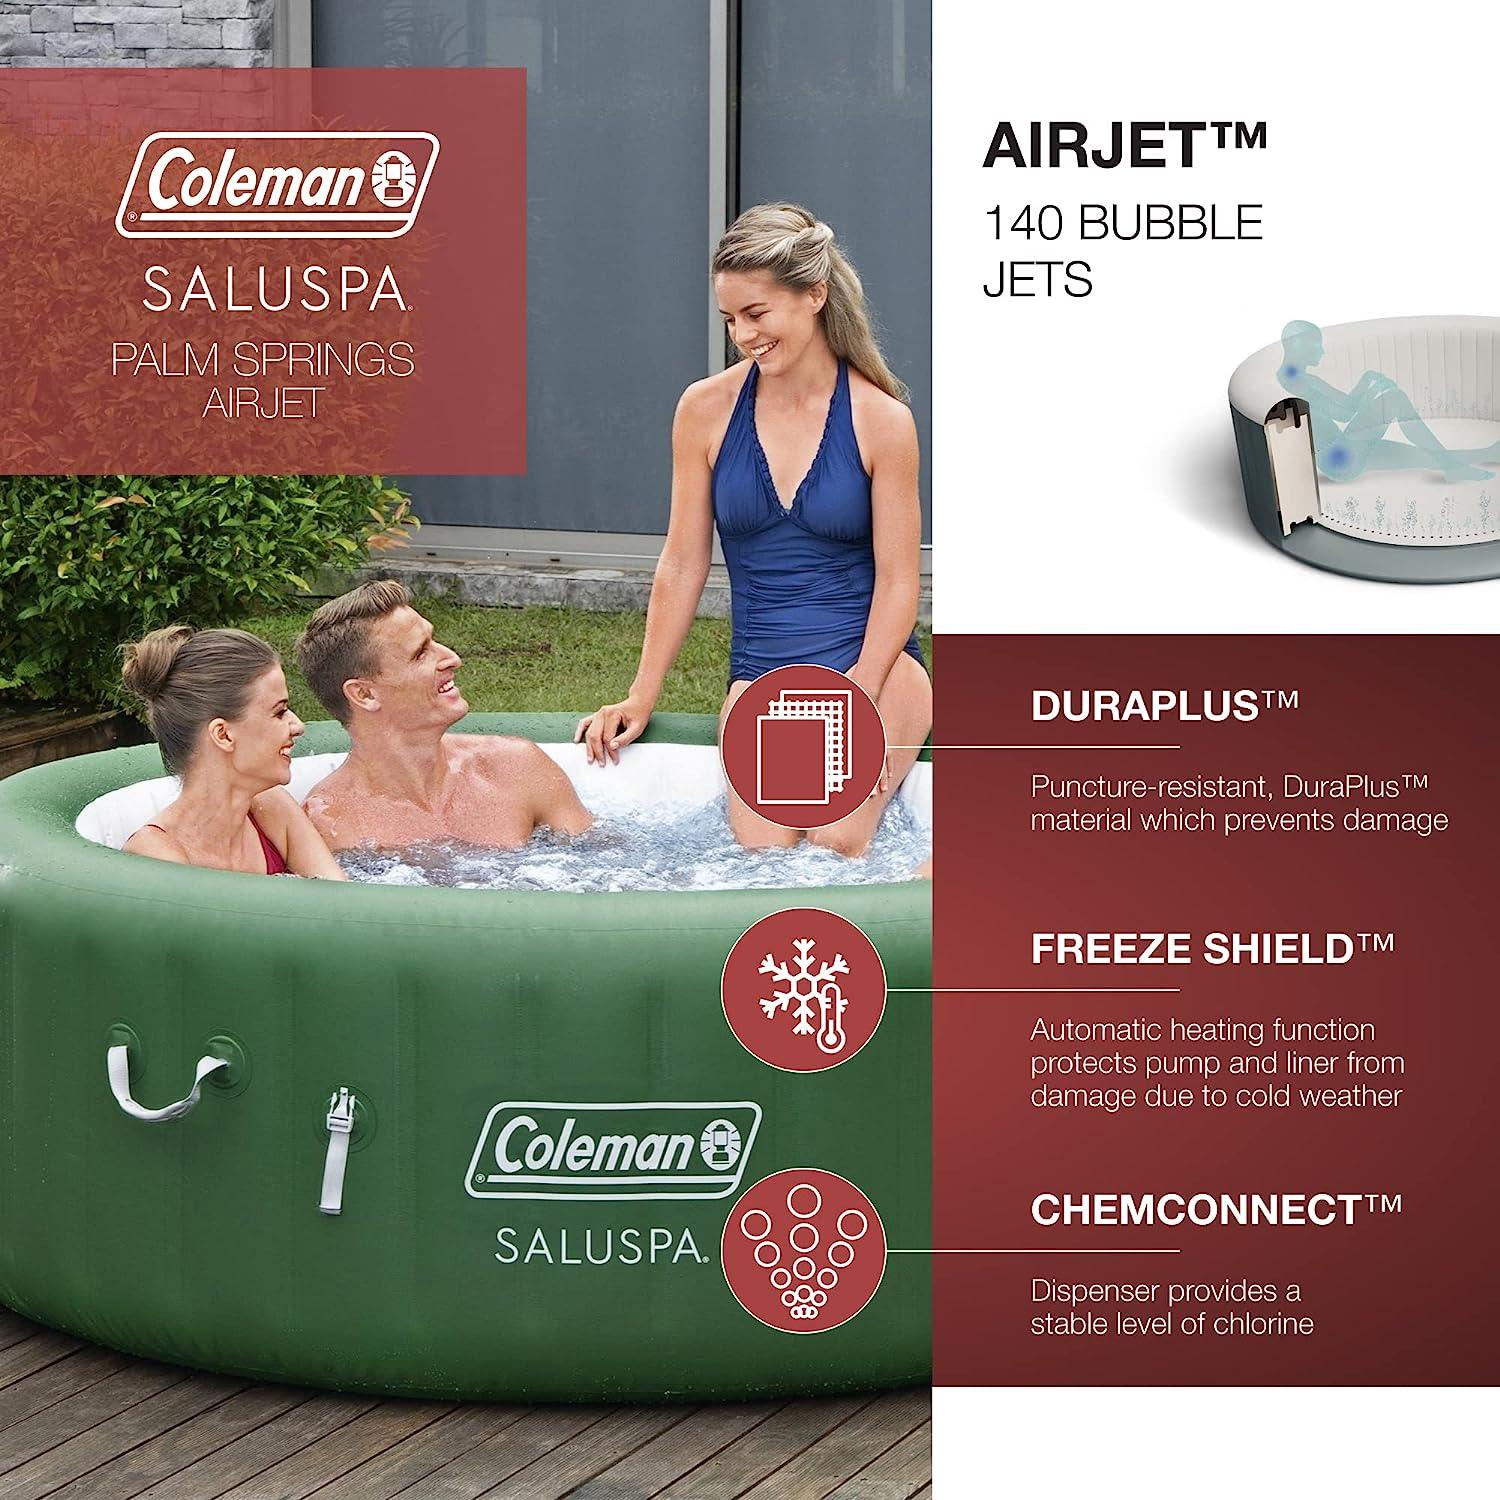 LazyTub™ SaluSpa Inflatable Hot Tub Spa | Portable Hot Tub with Heated Water System and 140 Bubble Jets - 4 People - Lazy Pro